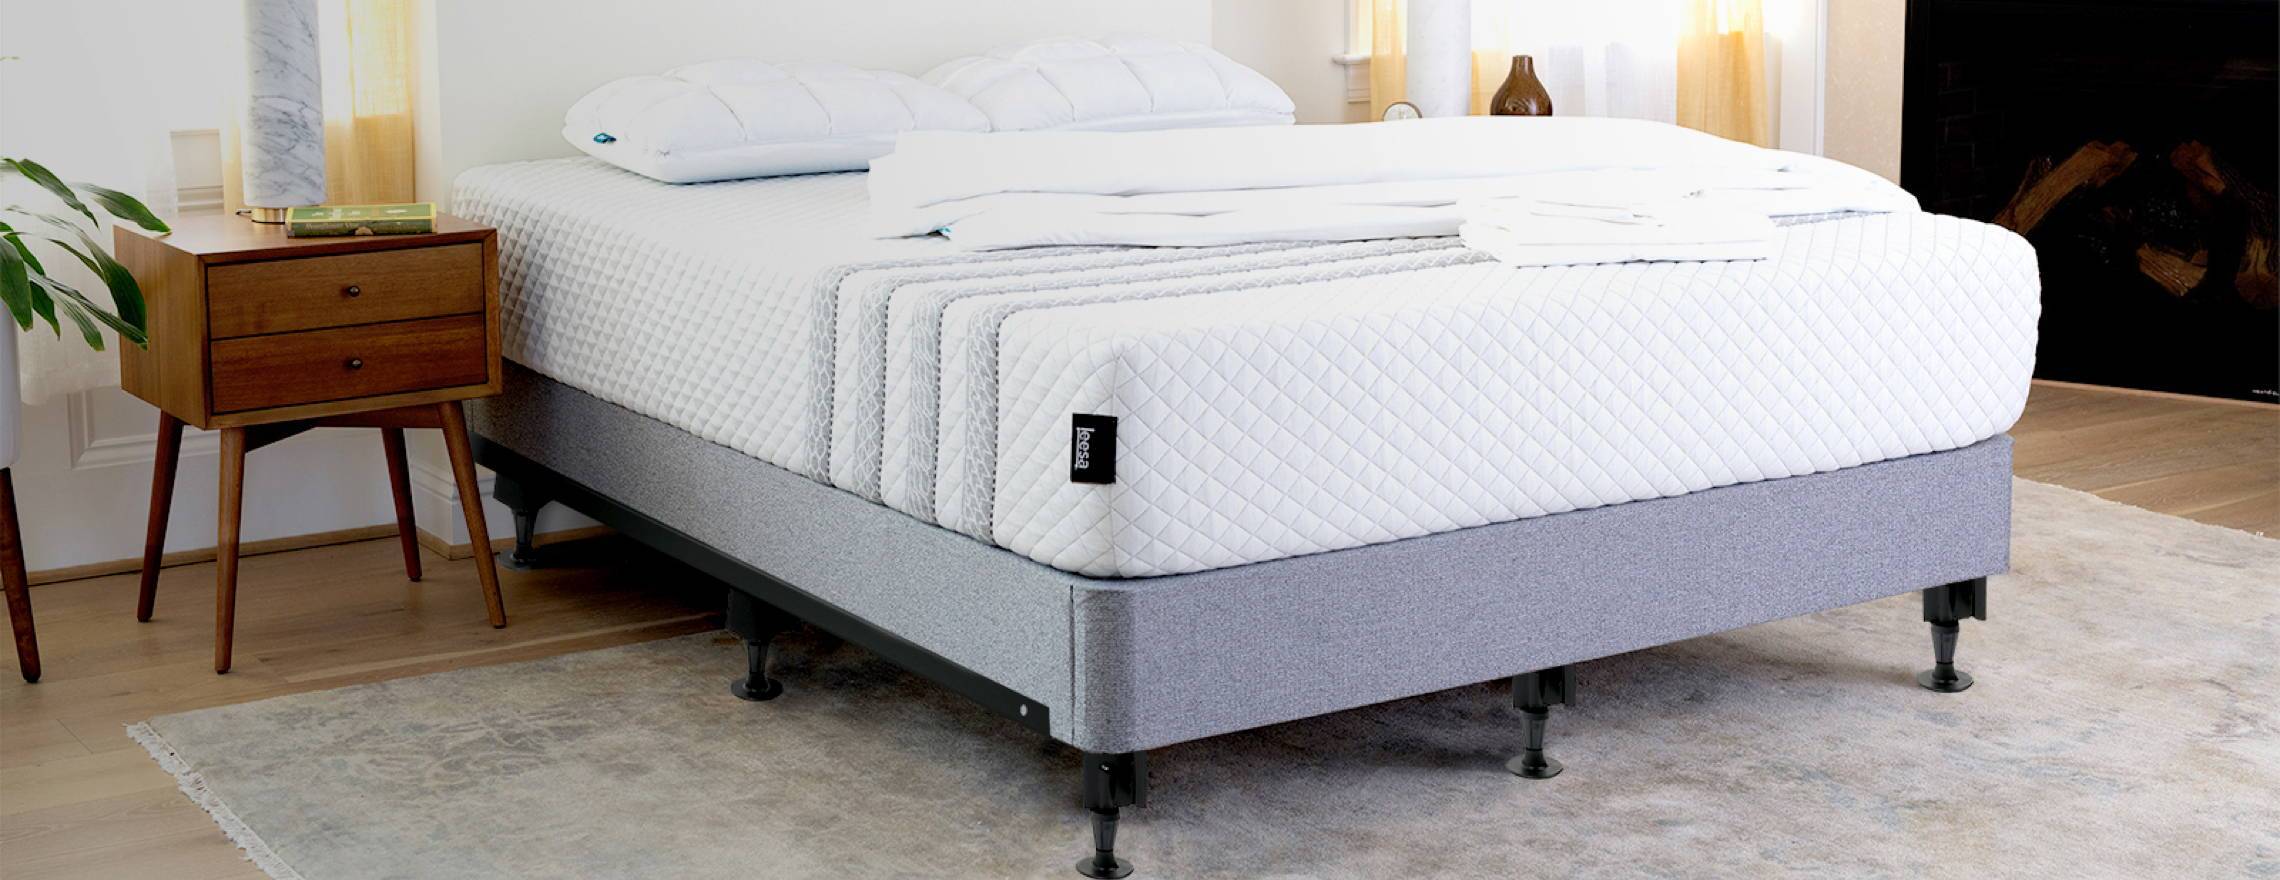 Hybrid Mattress, Can You Put A Mattress On Metal Bed Frame Without Box Spring